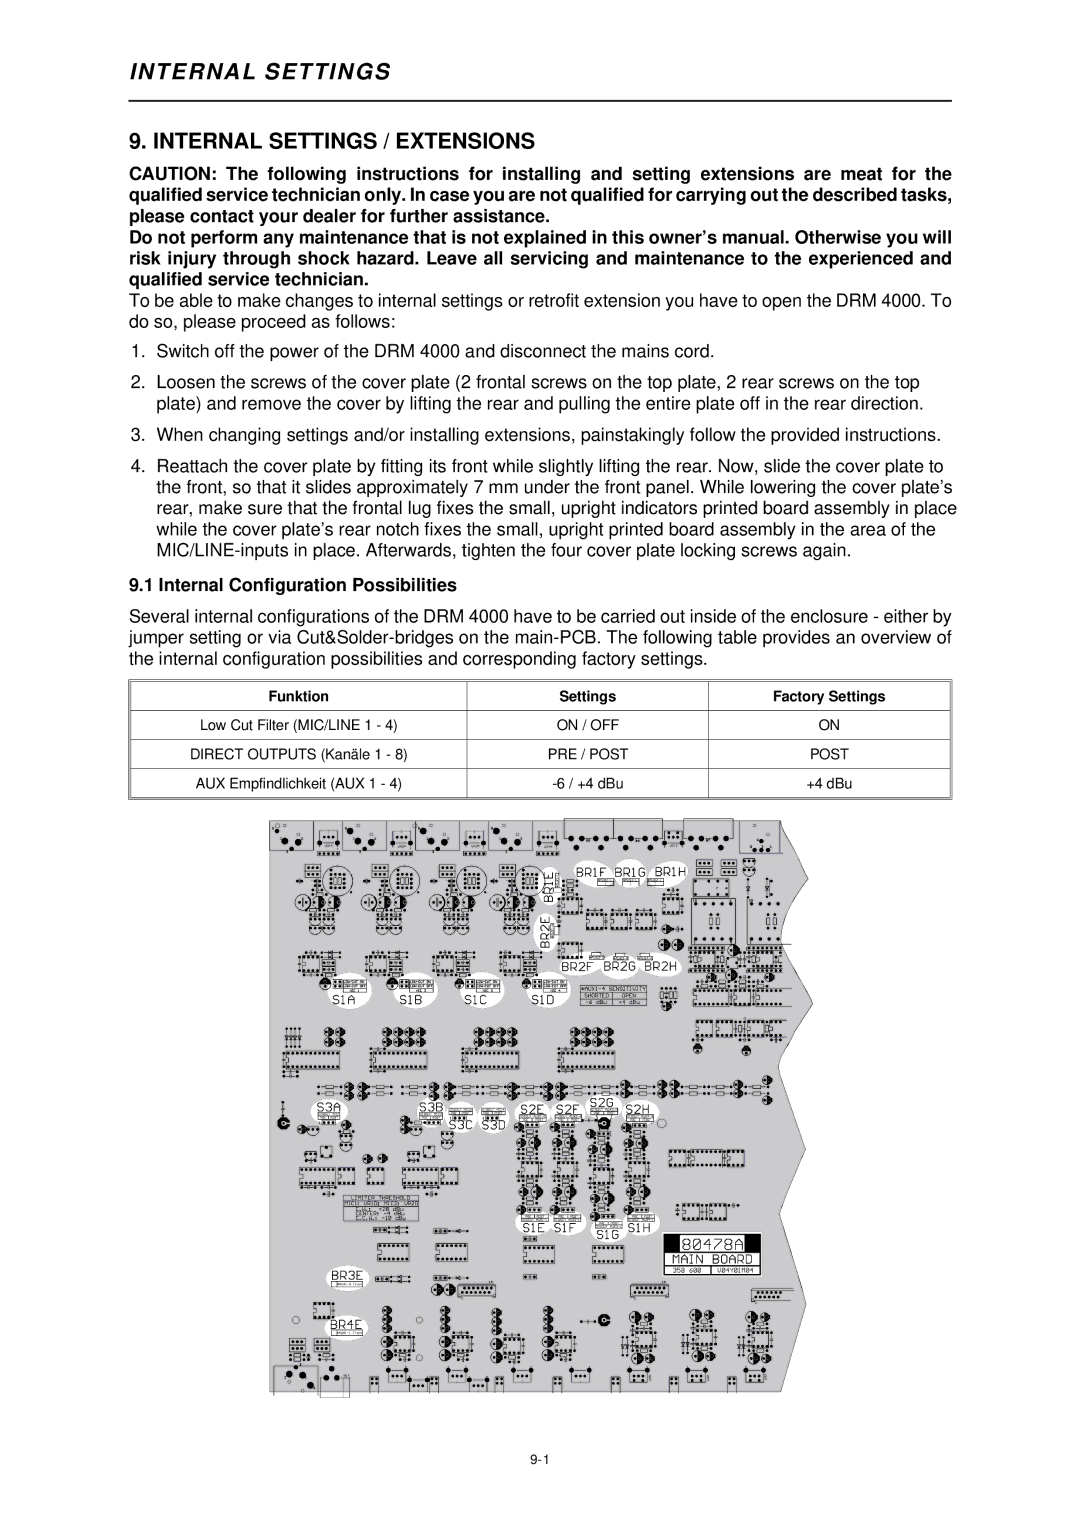 Dynacord DRM 4000 owner manual Internal Settings / Extensions, Internal Configuration Possibilities 